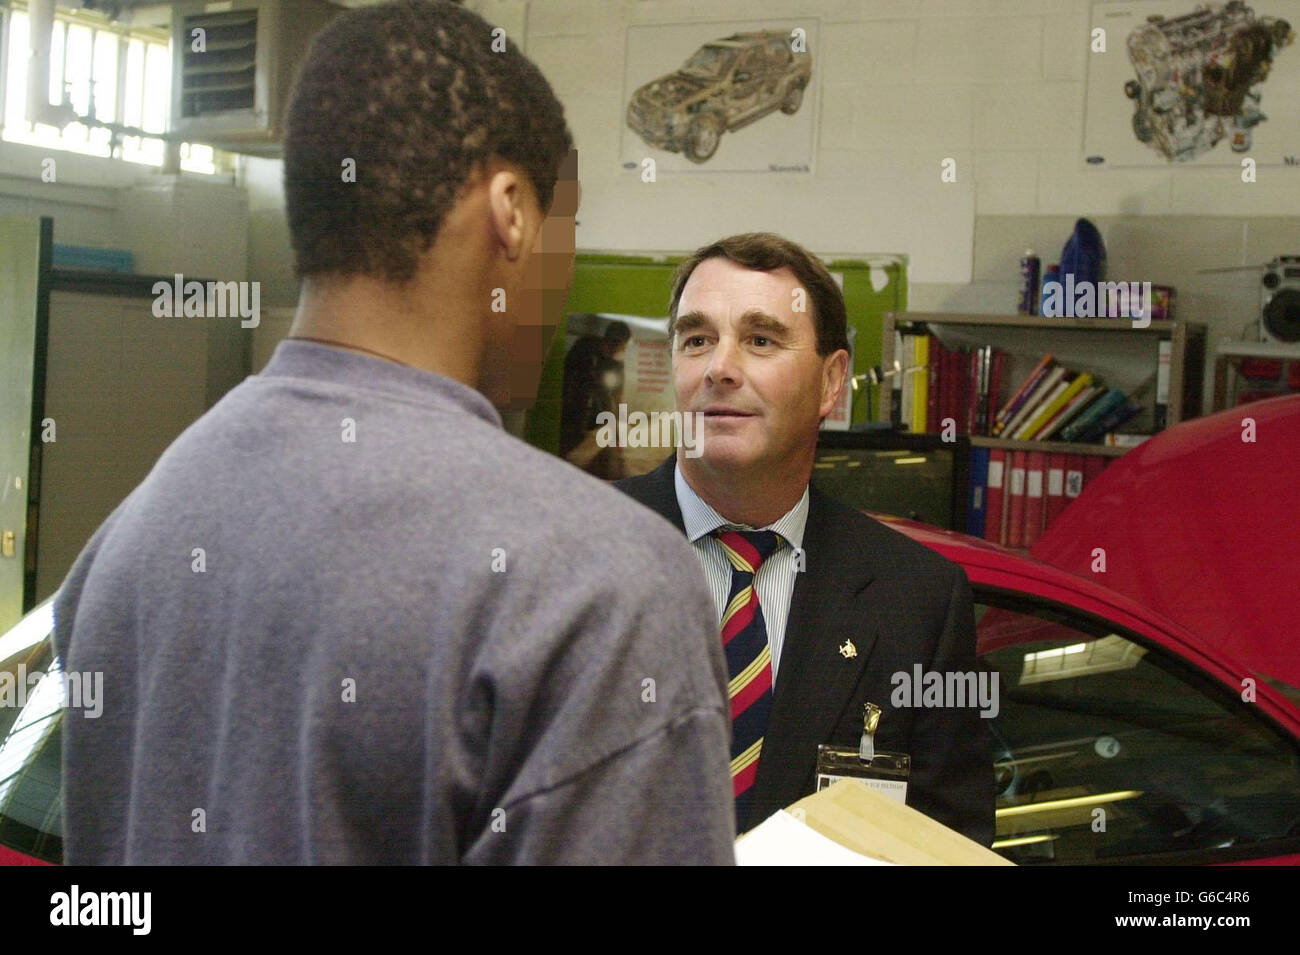 Former Formula 1 racing driver Nigel Mansell talks to a young offender inside Feltham Young Offenders Institute in Feltham, south-west London. Mansell, who is President of UK Youth, * .. was visiting the institute to hand out awards to young offenders who have excelled in NVQ's, Duke of Edinburgh Bronze Awards and on Ford apprenticeships which see the young men learning skills relating to the motor industry. Stock Photo